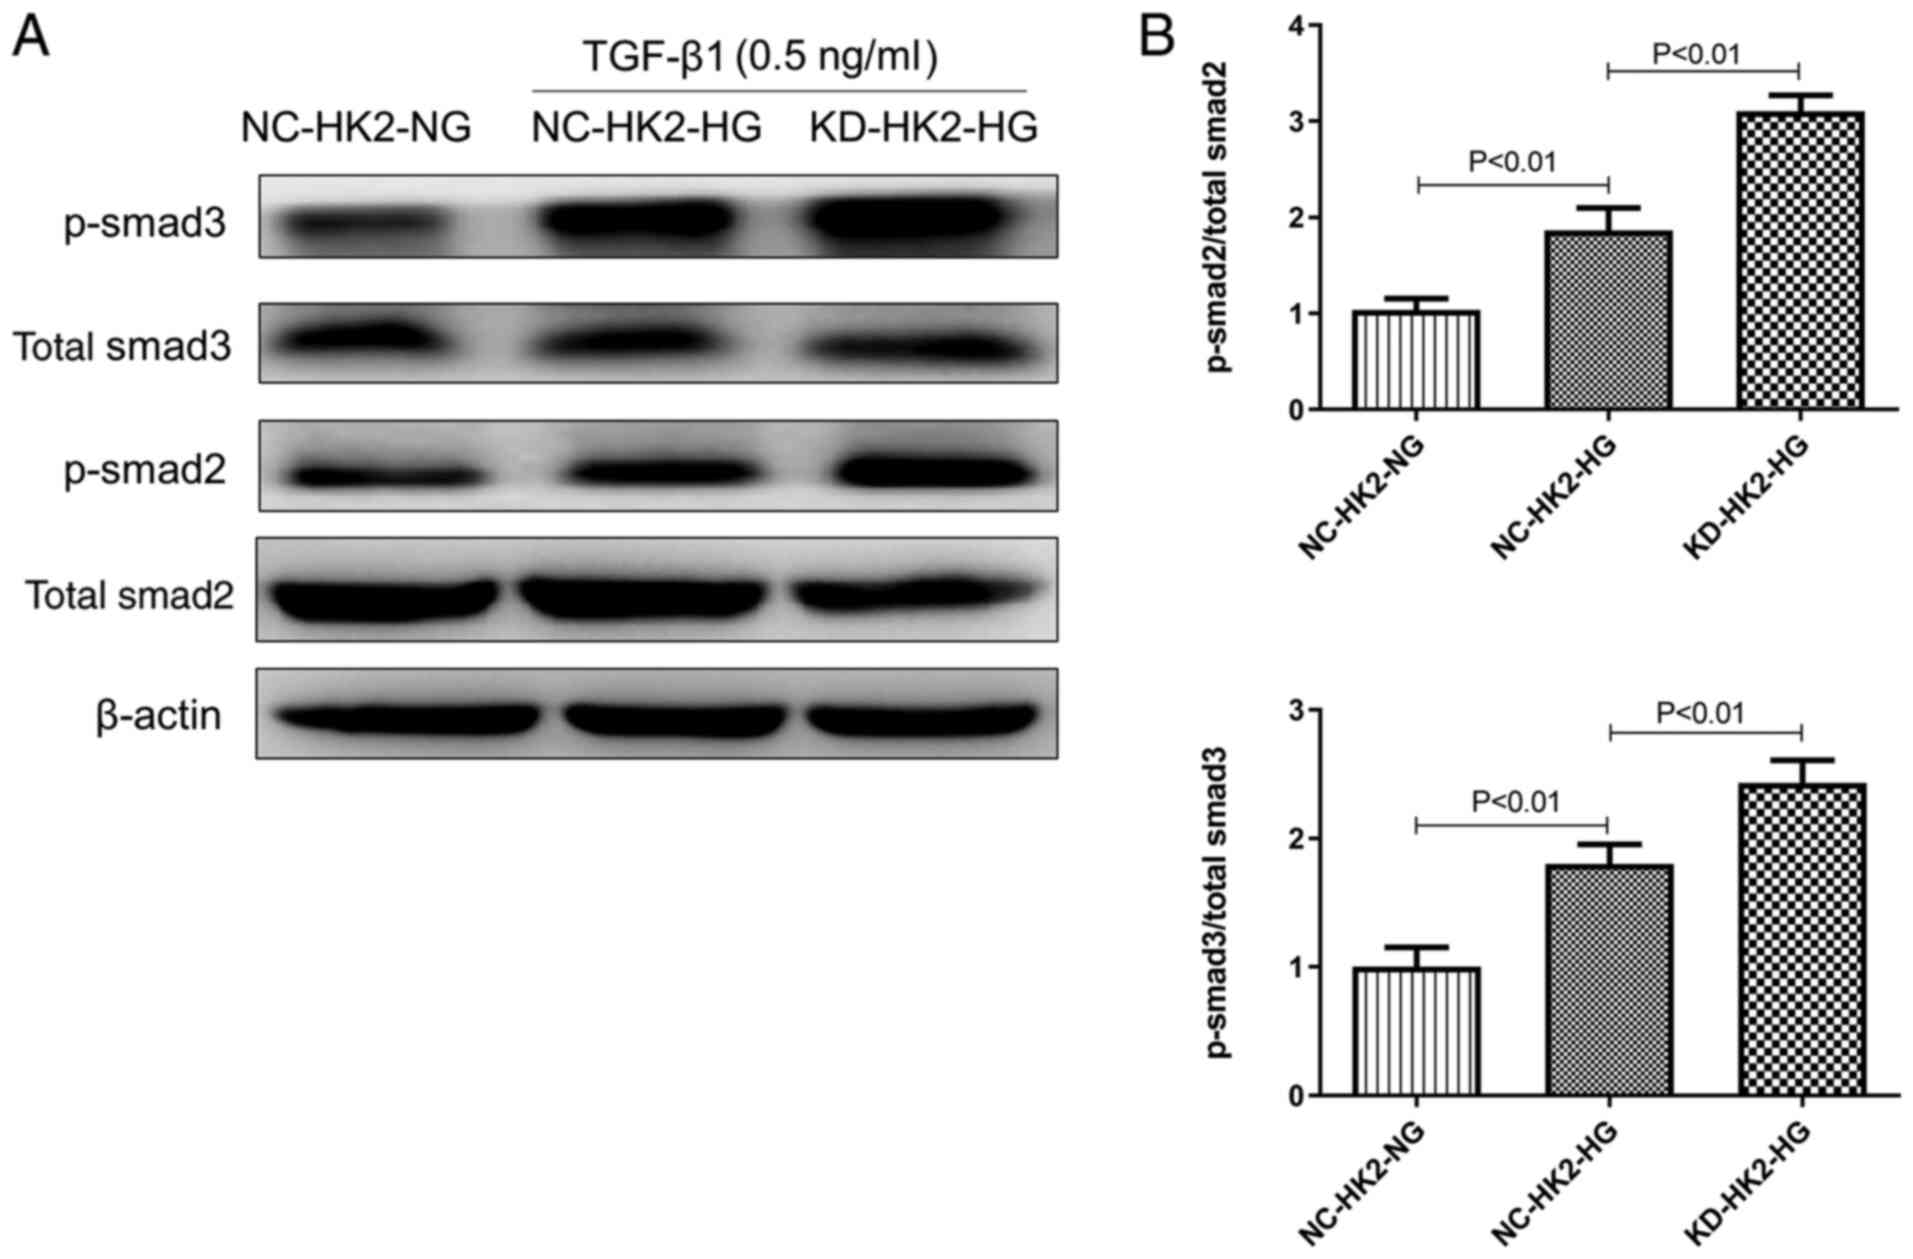 Knockout Of Ngal Aggravates Tubulointerstitial Injury In A Mouse Model Of Diabetic Nephropathy By Enhancing Oxidative Stress And Fibrosis